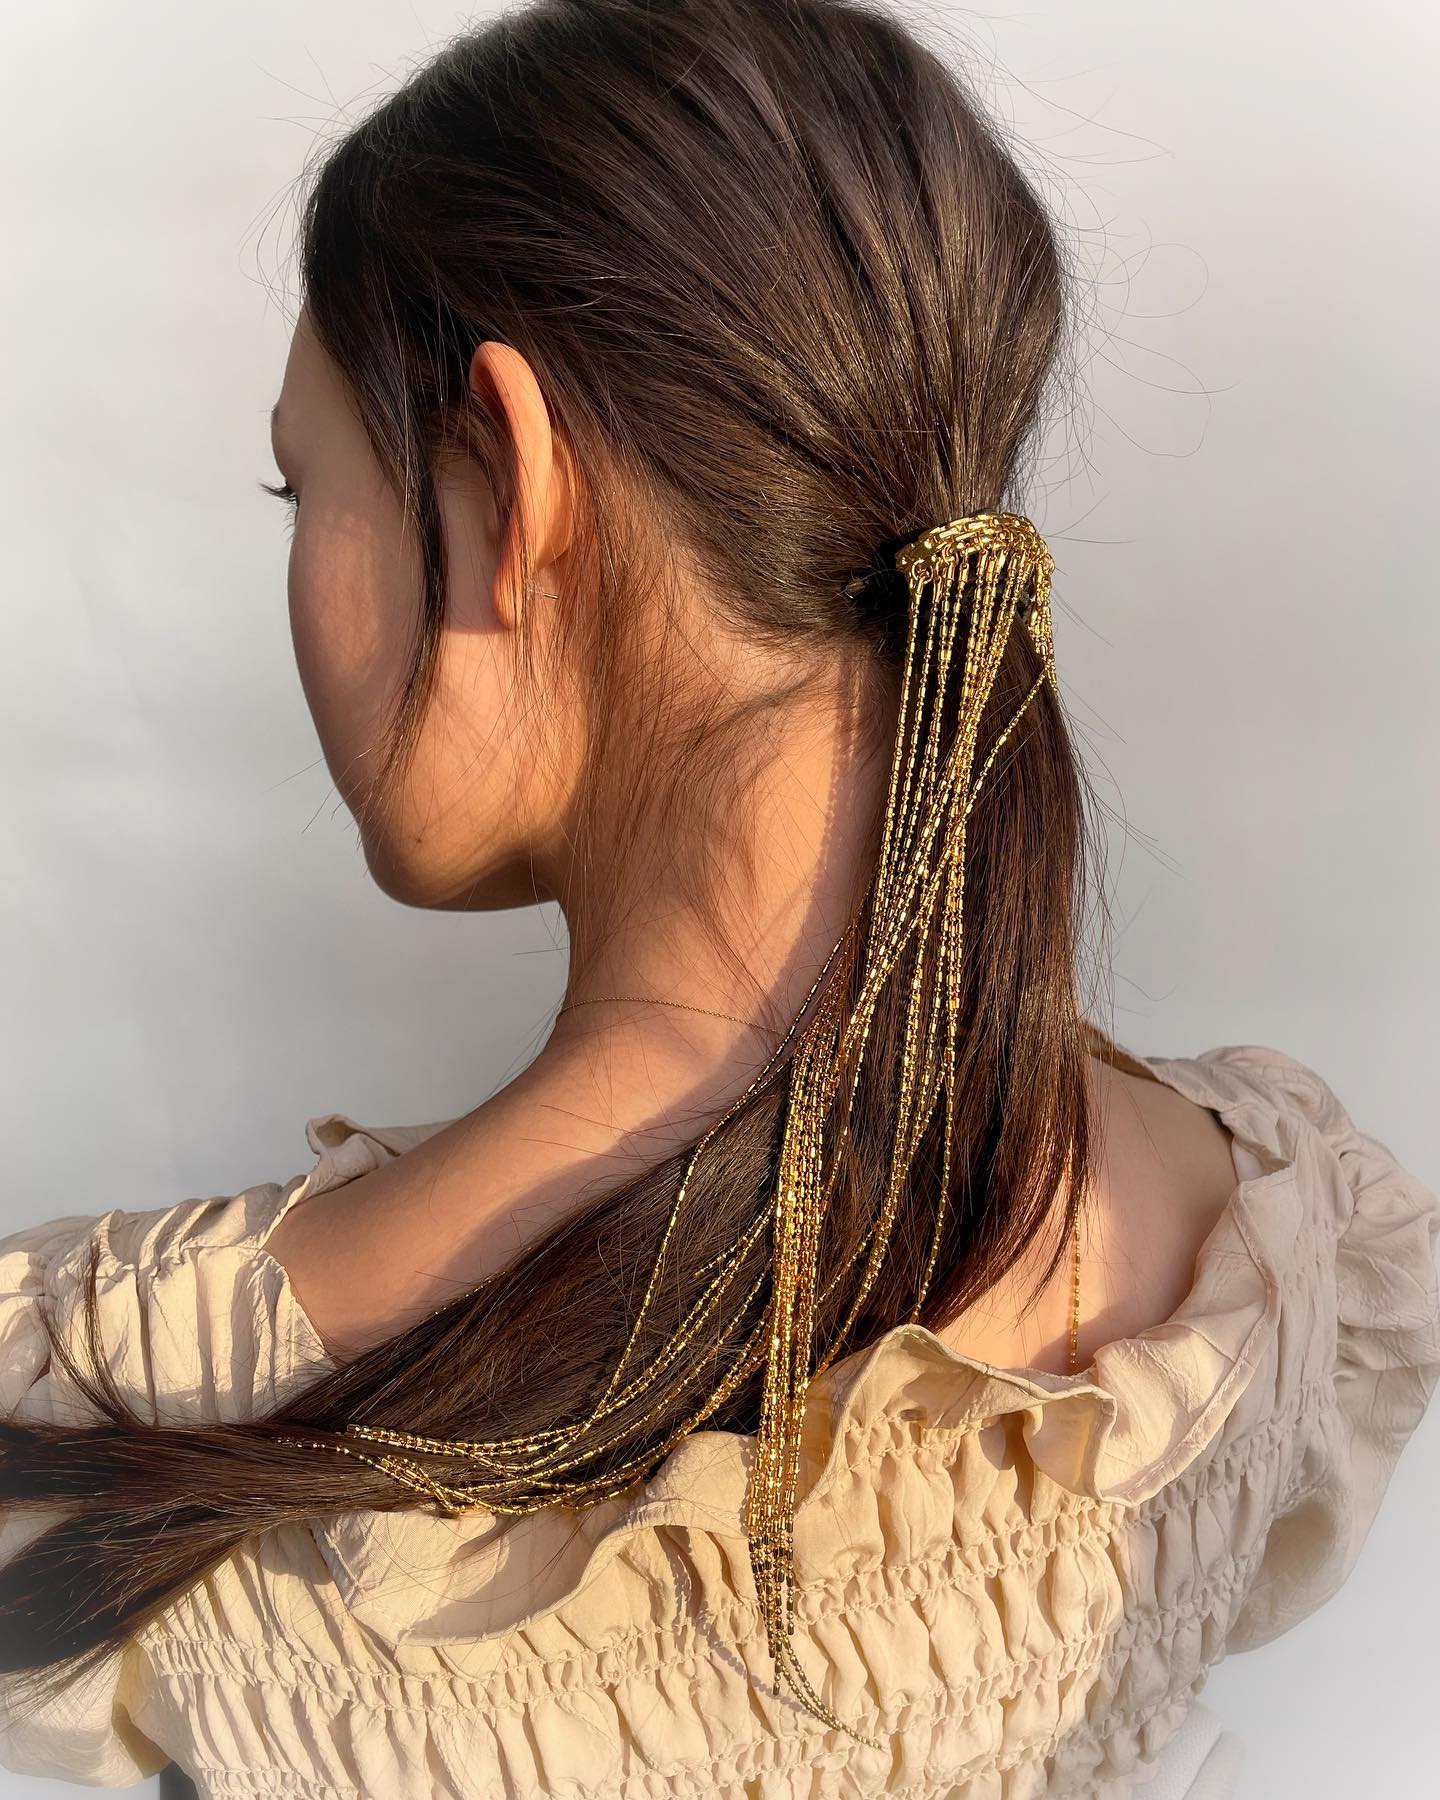 low ponytail with chain accessory